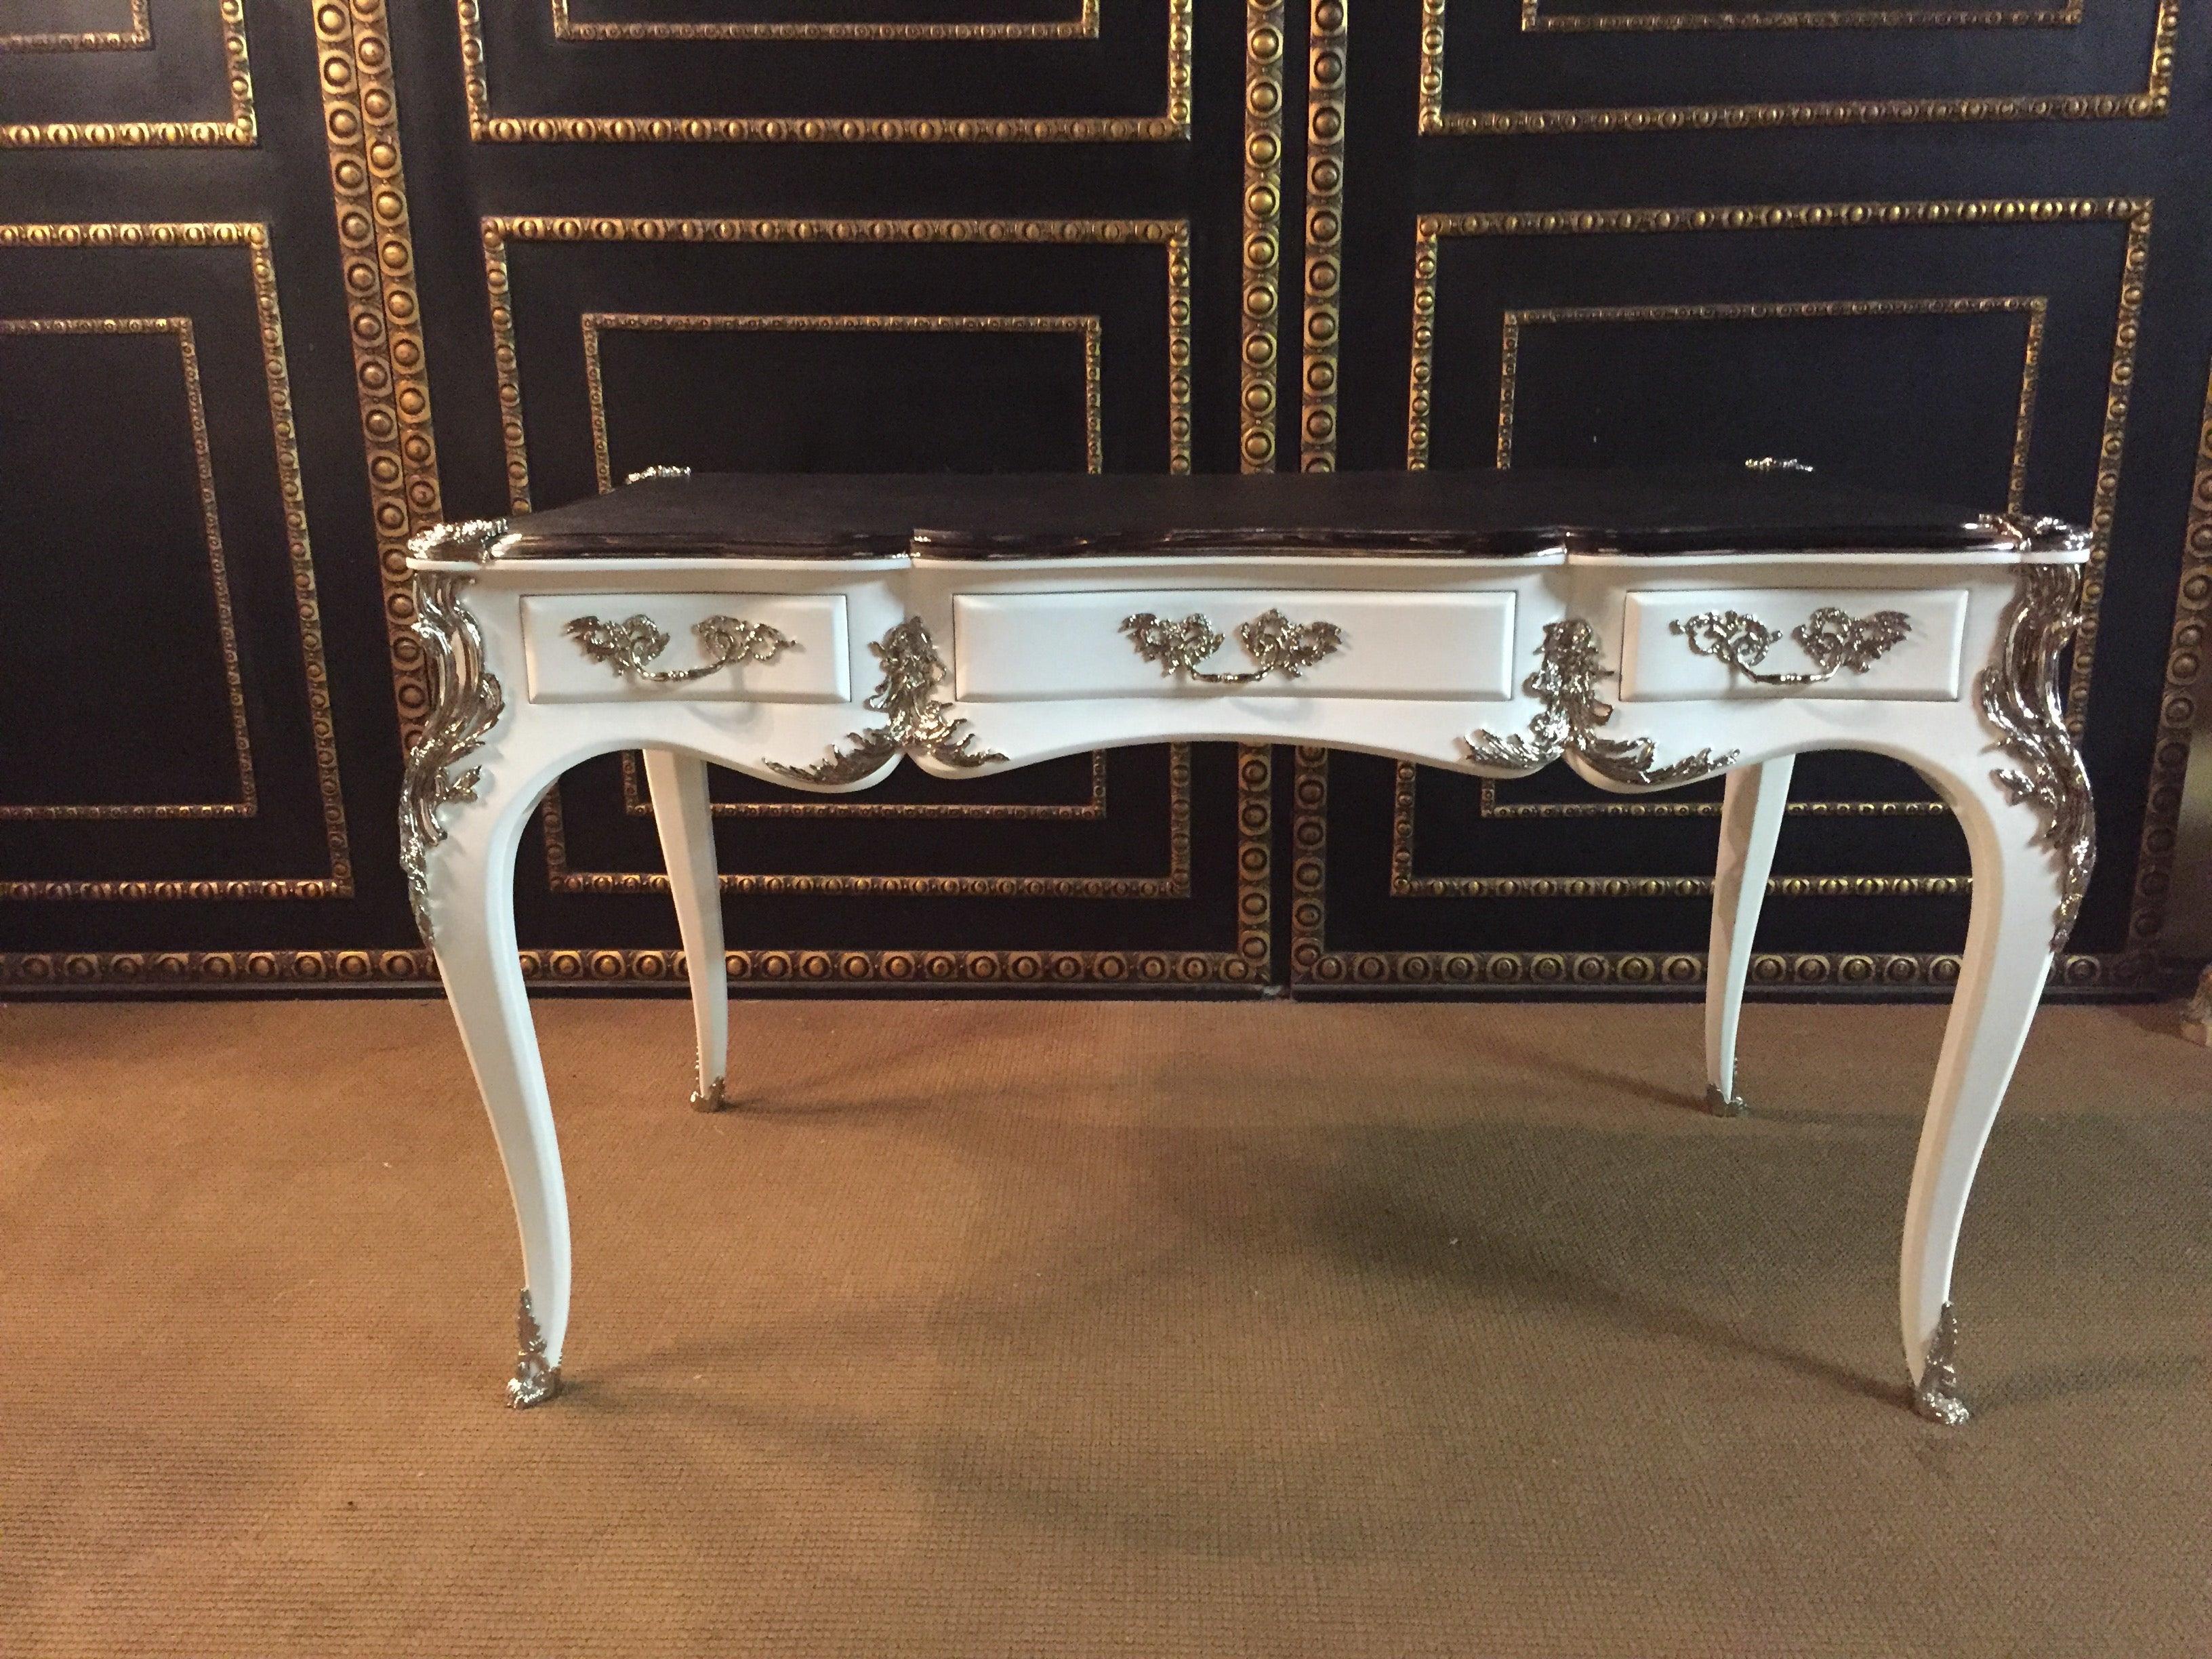 Bureau plat writing table in the style of Louis XV style, silvered bronze fittings. Piano lacquer white on solid beech wood. Heavily arched, four-sided passively curved tripod frame with wide knee lug on elegant curved squares in the drive boxes.